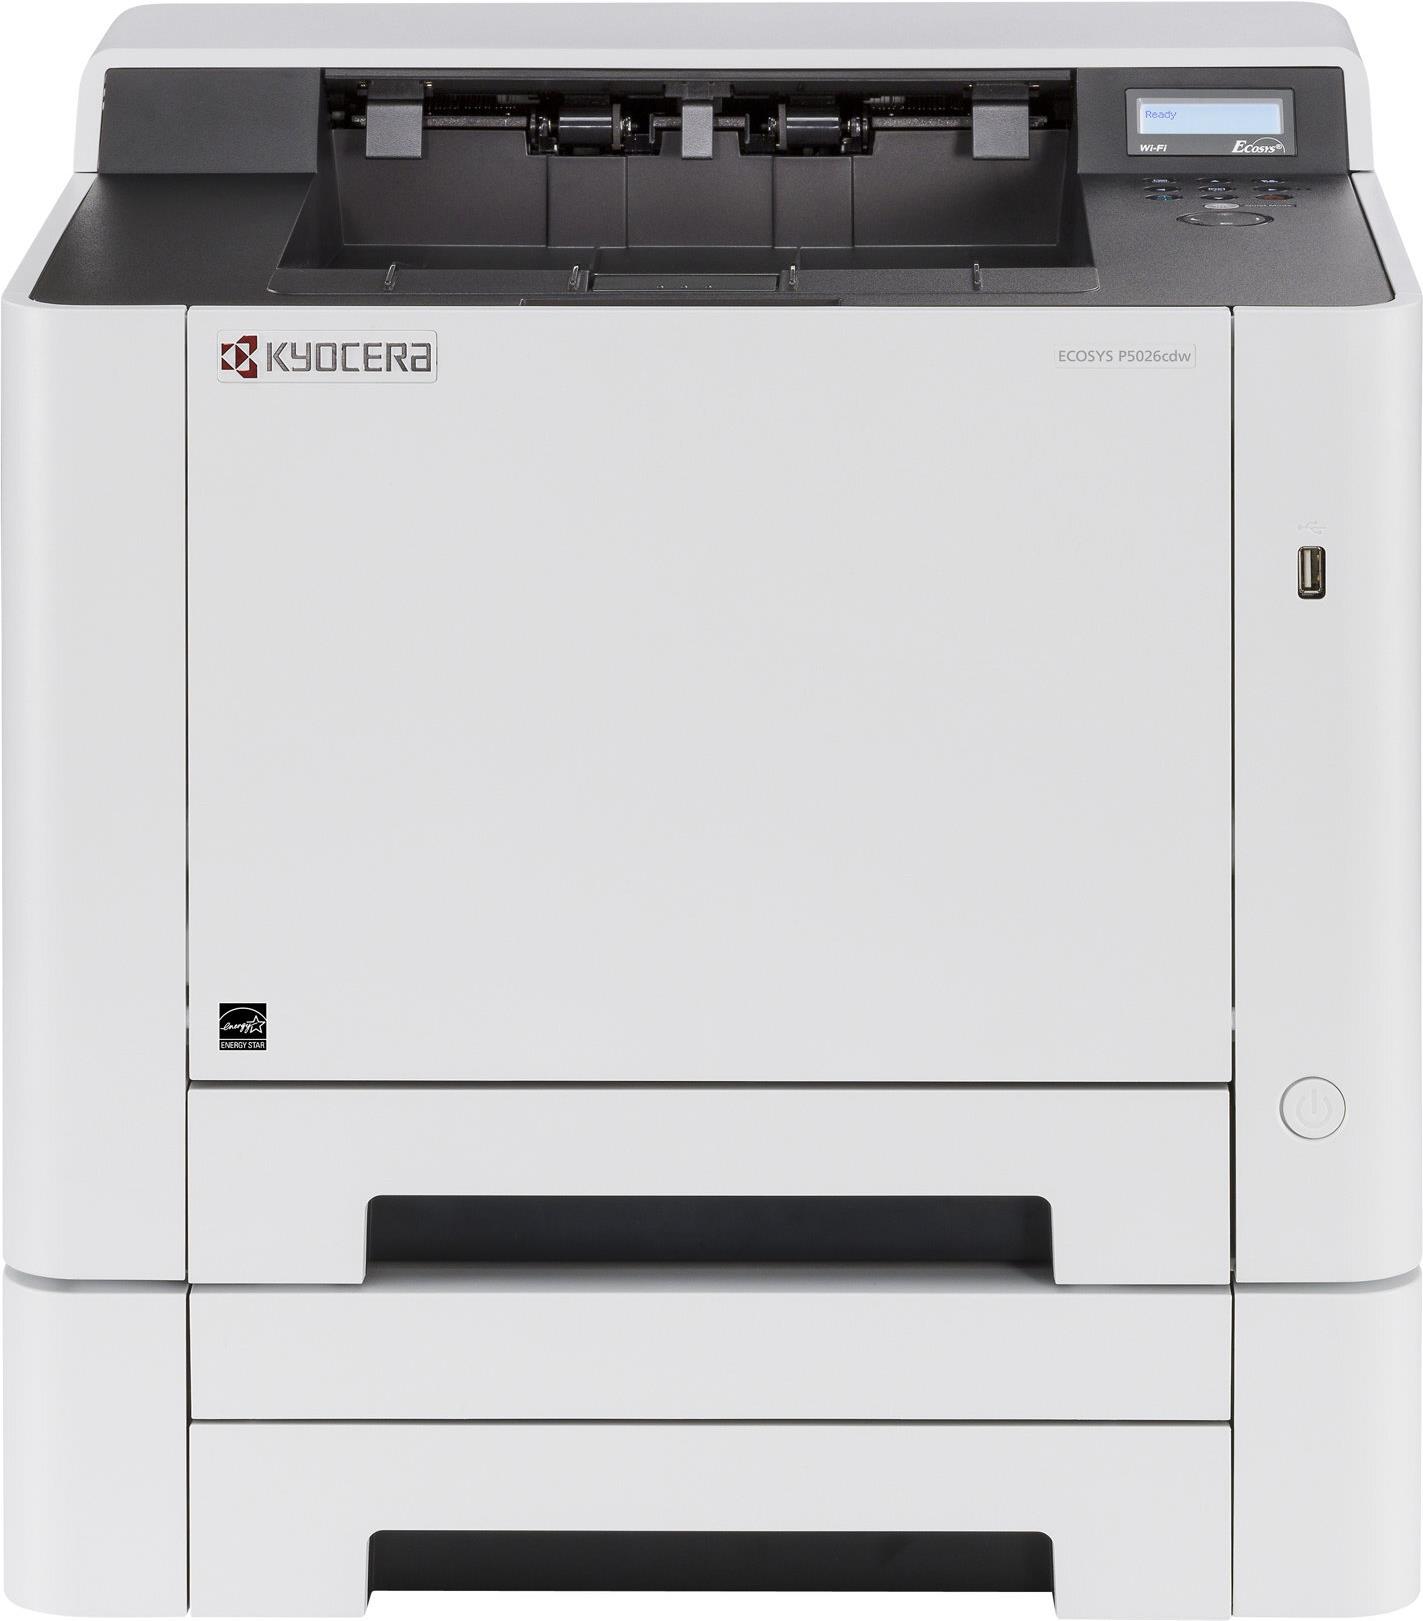 KYOCERA P5026cdw/Plus Laser Color Printer 27ppm A4 Duplex Wlan Climate Protection System (870B61102RB3NL3)